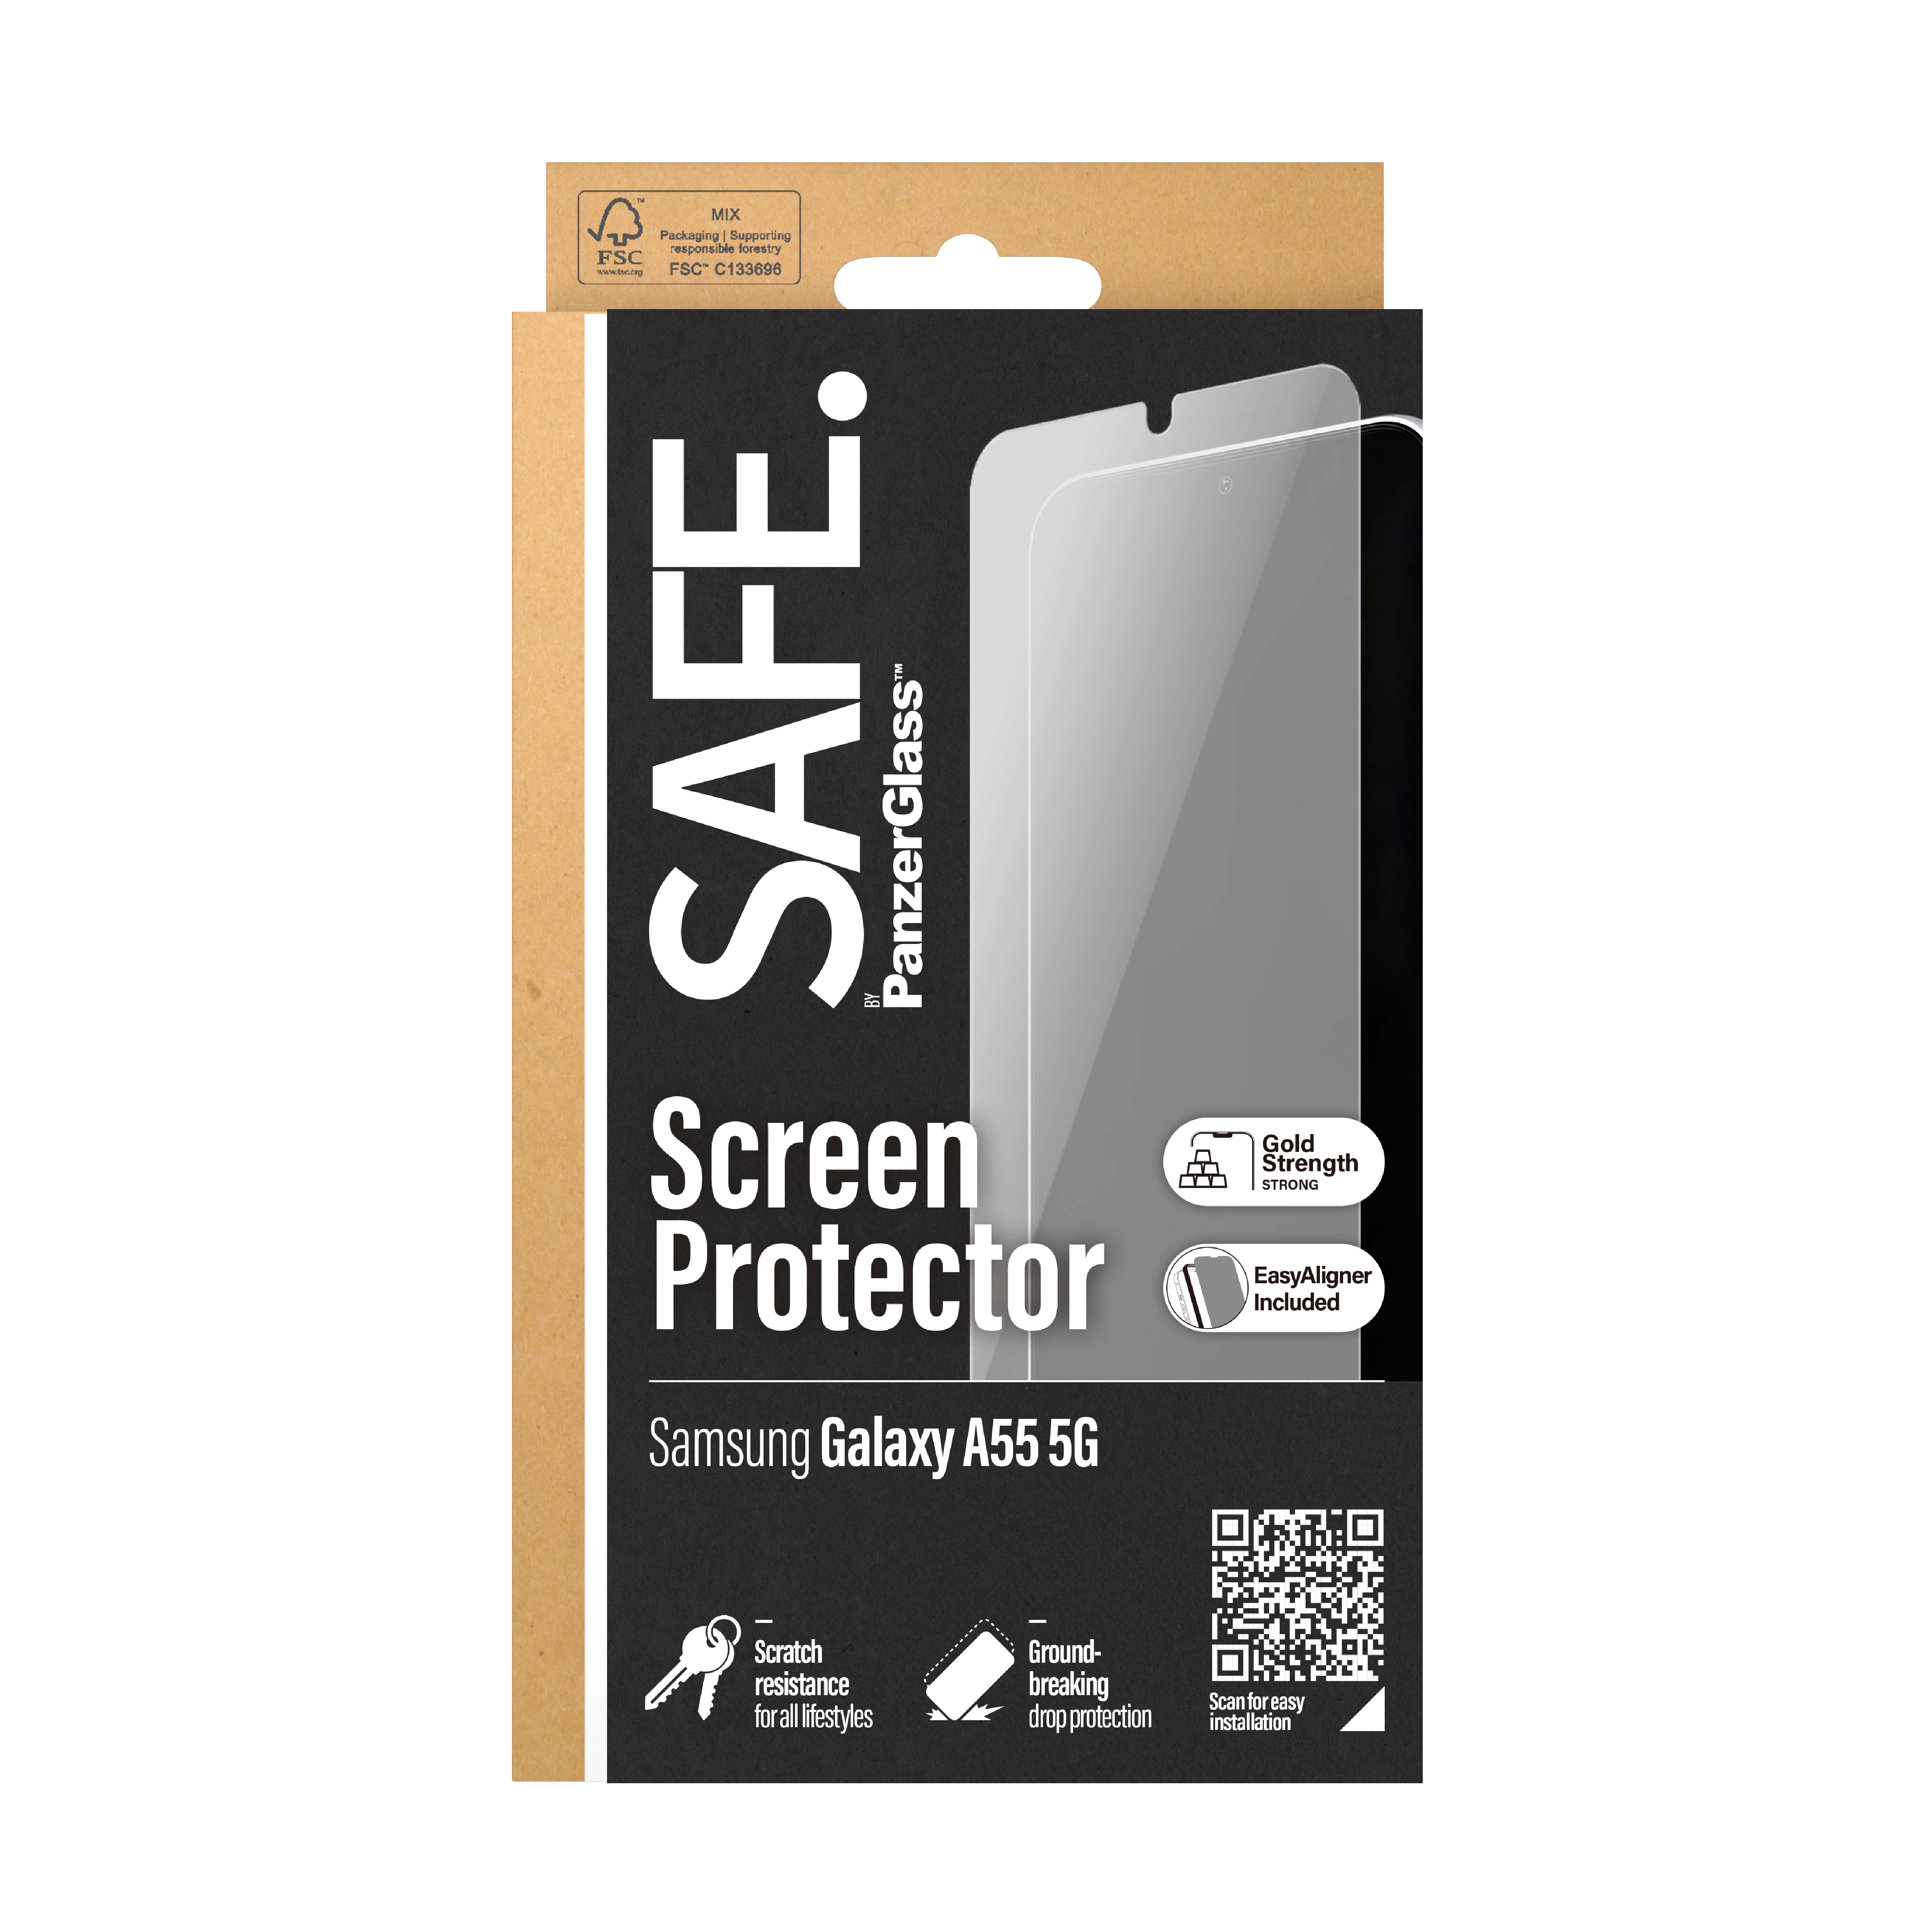 Samsung Galaxy A55 Screen Protector Ultra Wide Fit (with EasyAligner)